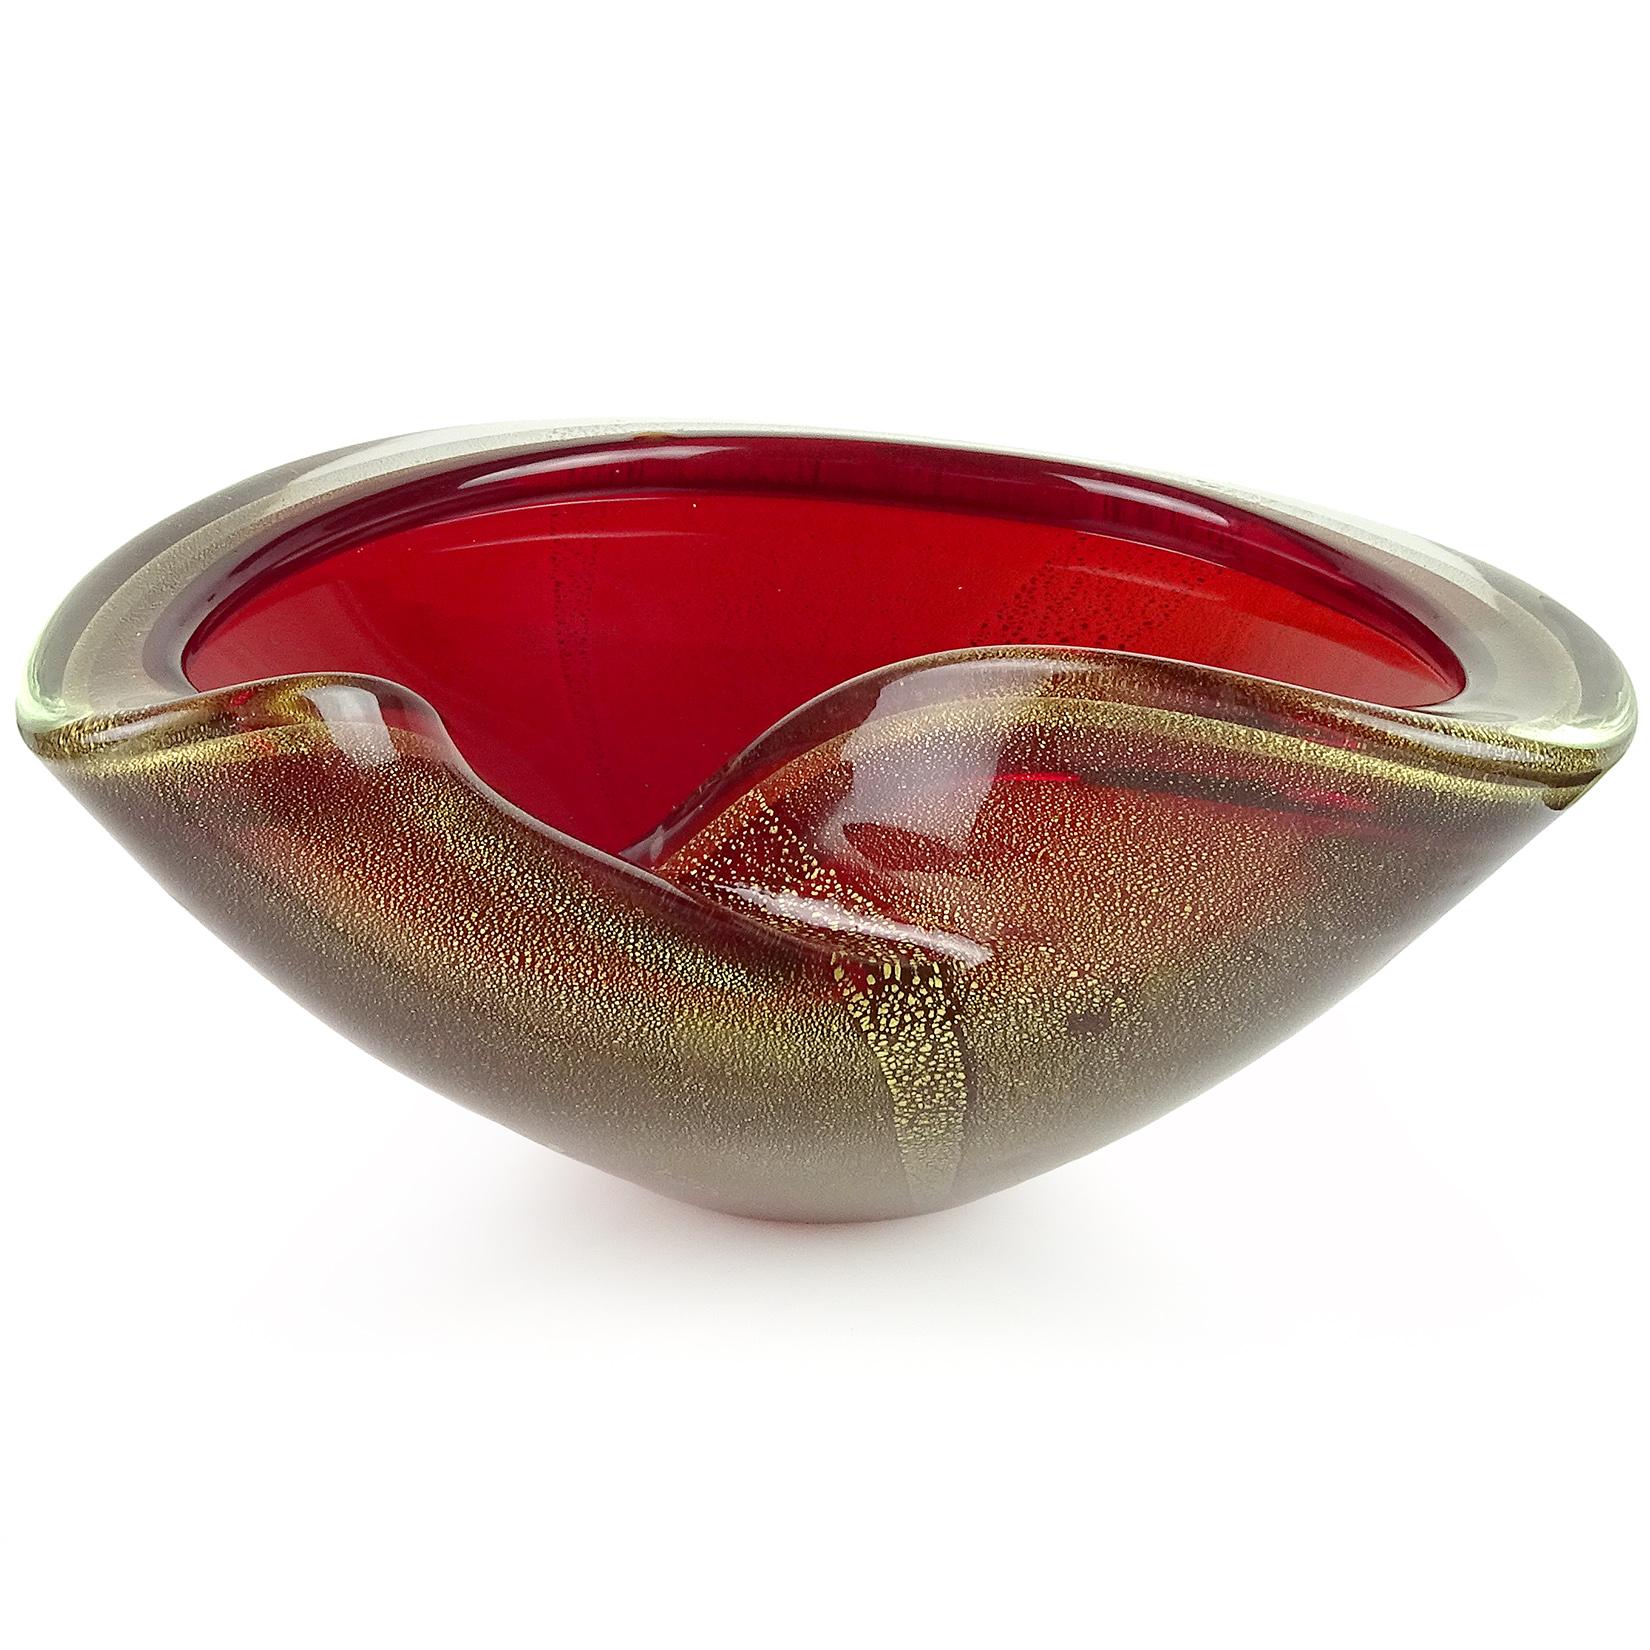 Beautiful vintage Murano hand blown red and gold flecks Italian art glass bowl. Attributed to designer Archimede Seguso. The piece is profusely covered in gold leaf with folded over rim and decorative fold. Would make a great display piece on any